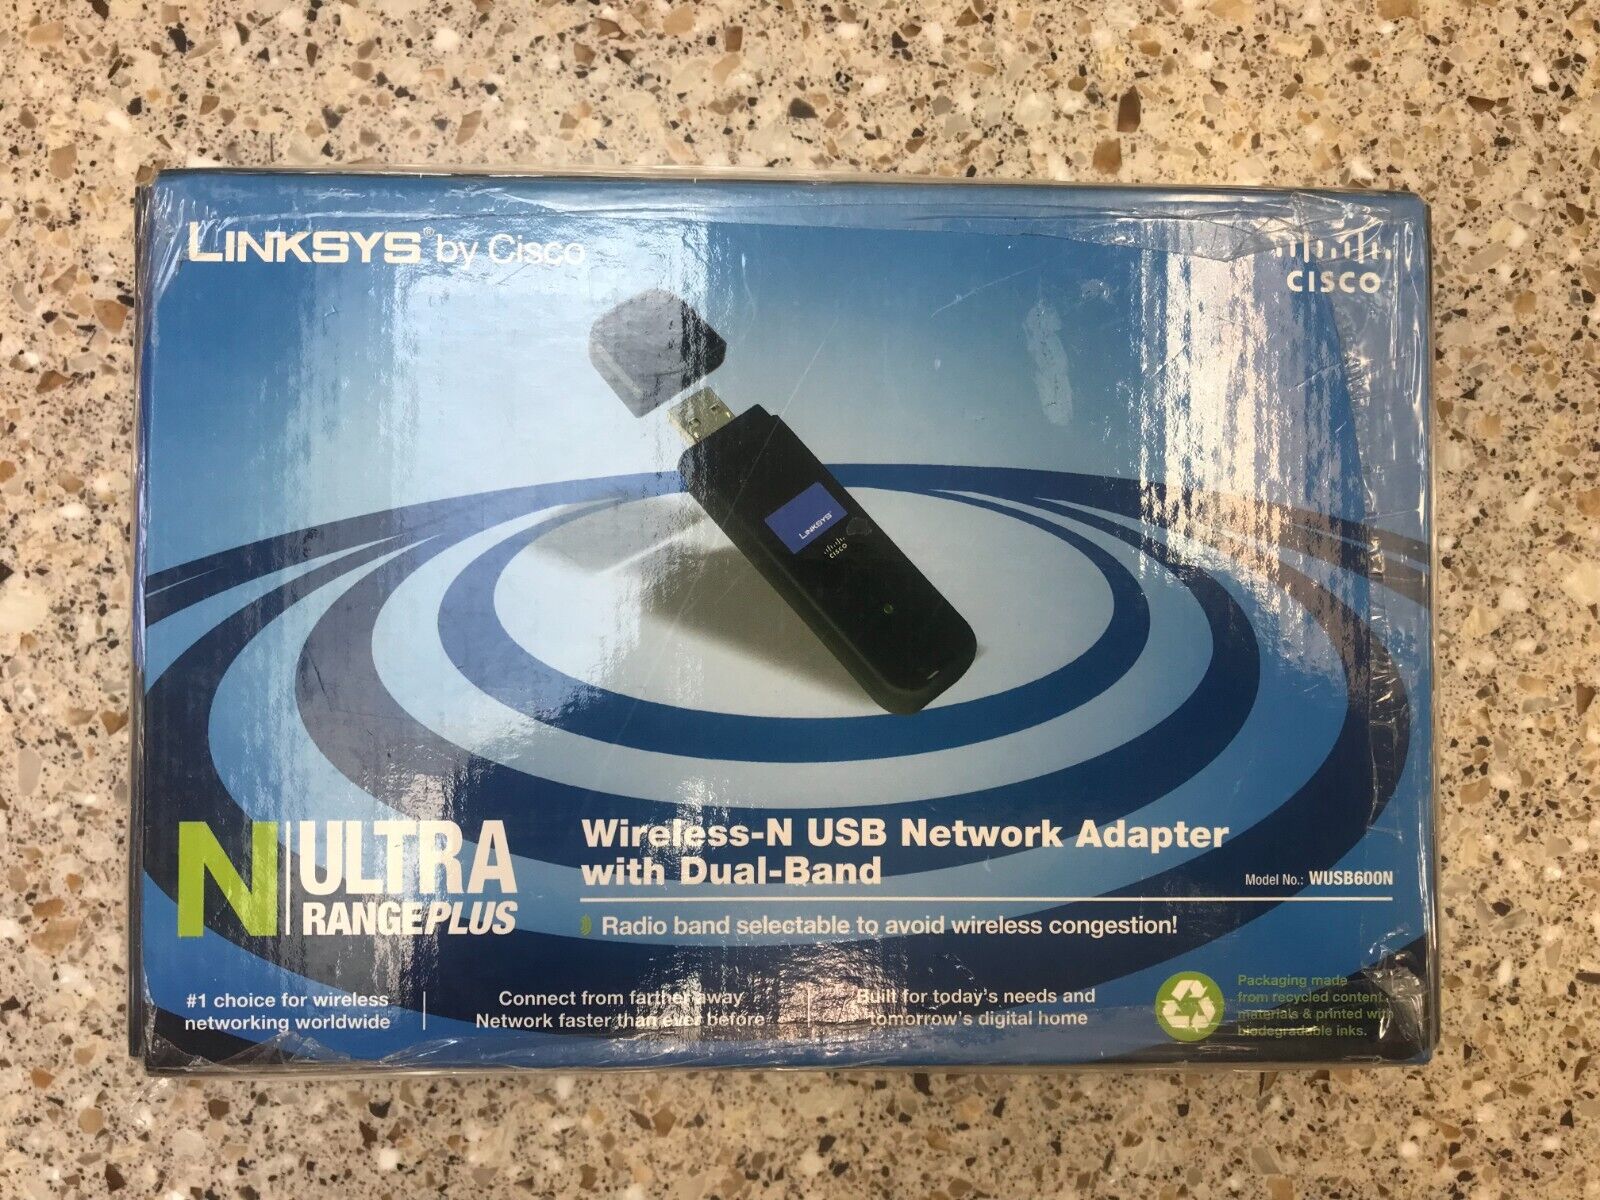 LINKSYS WUSB600N Wireless-N USB Network Adapter with Dual-Band